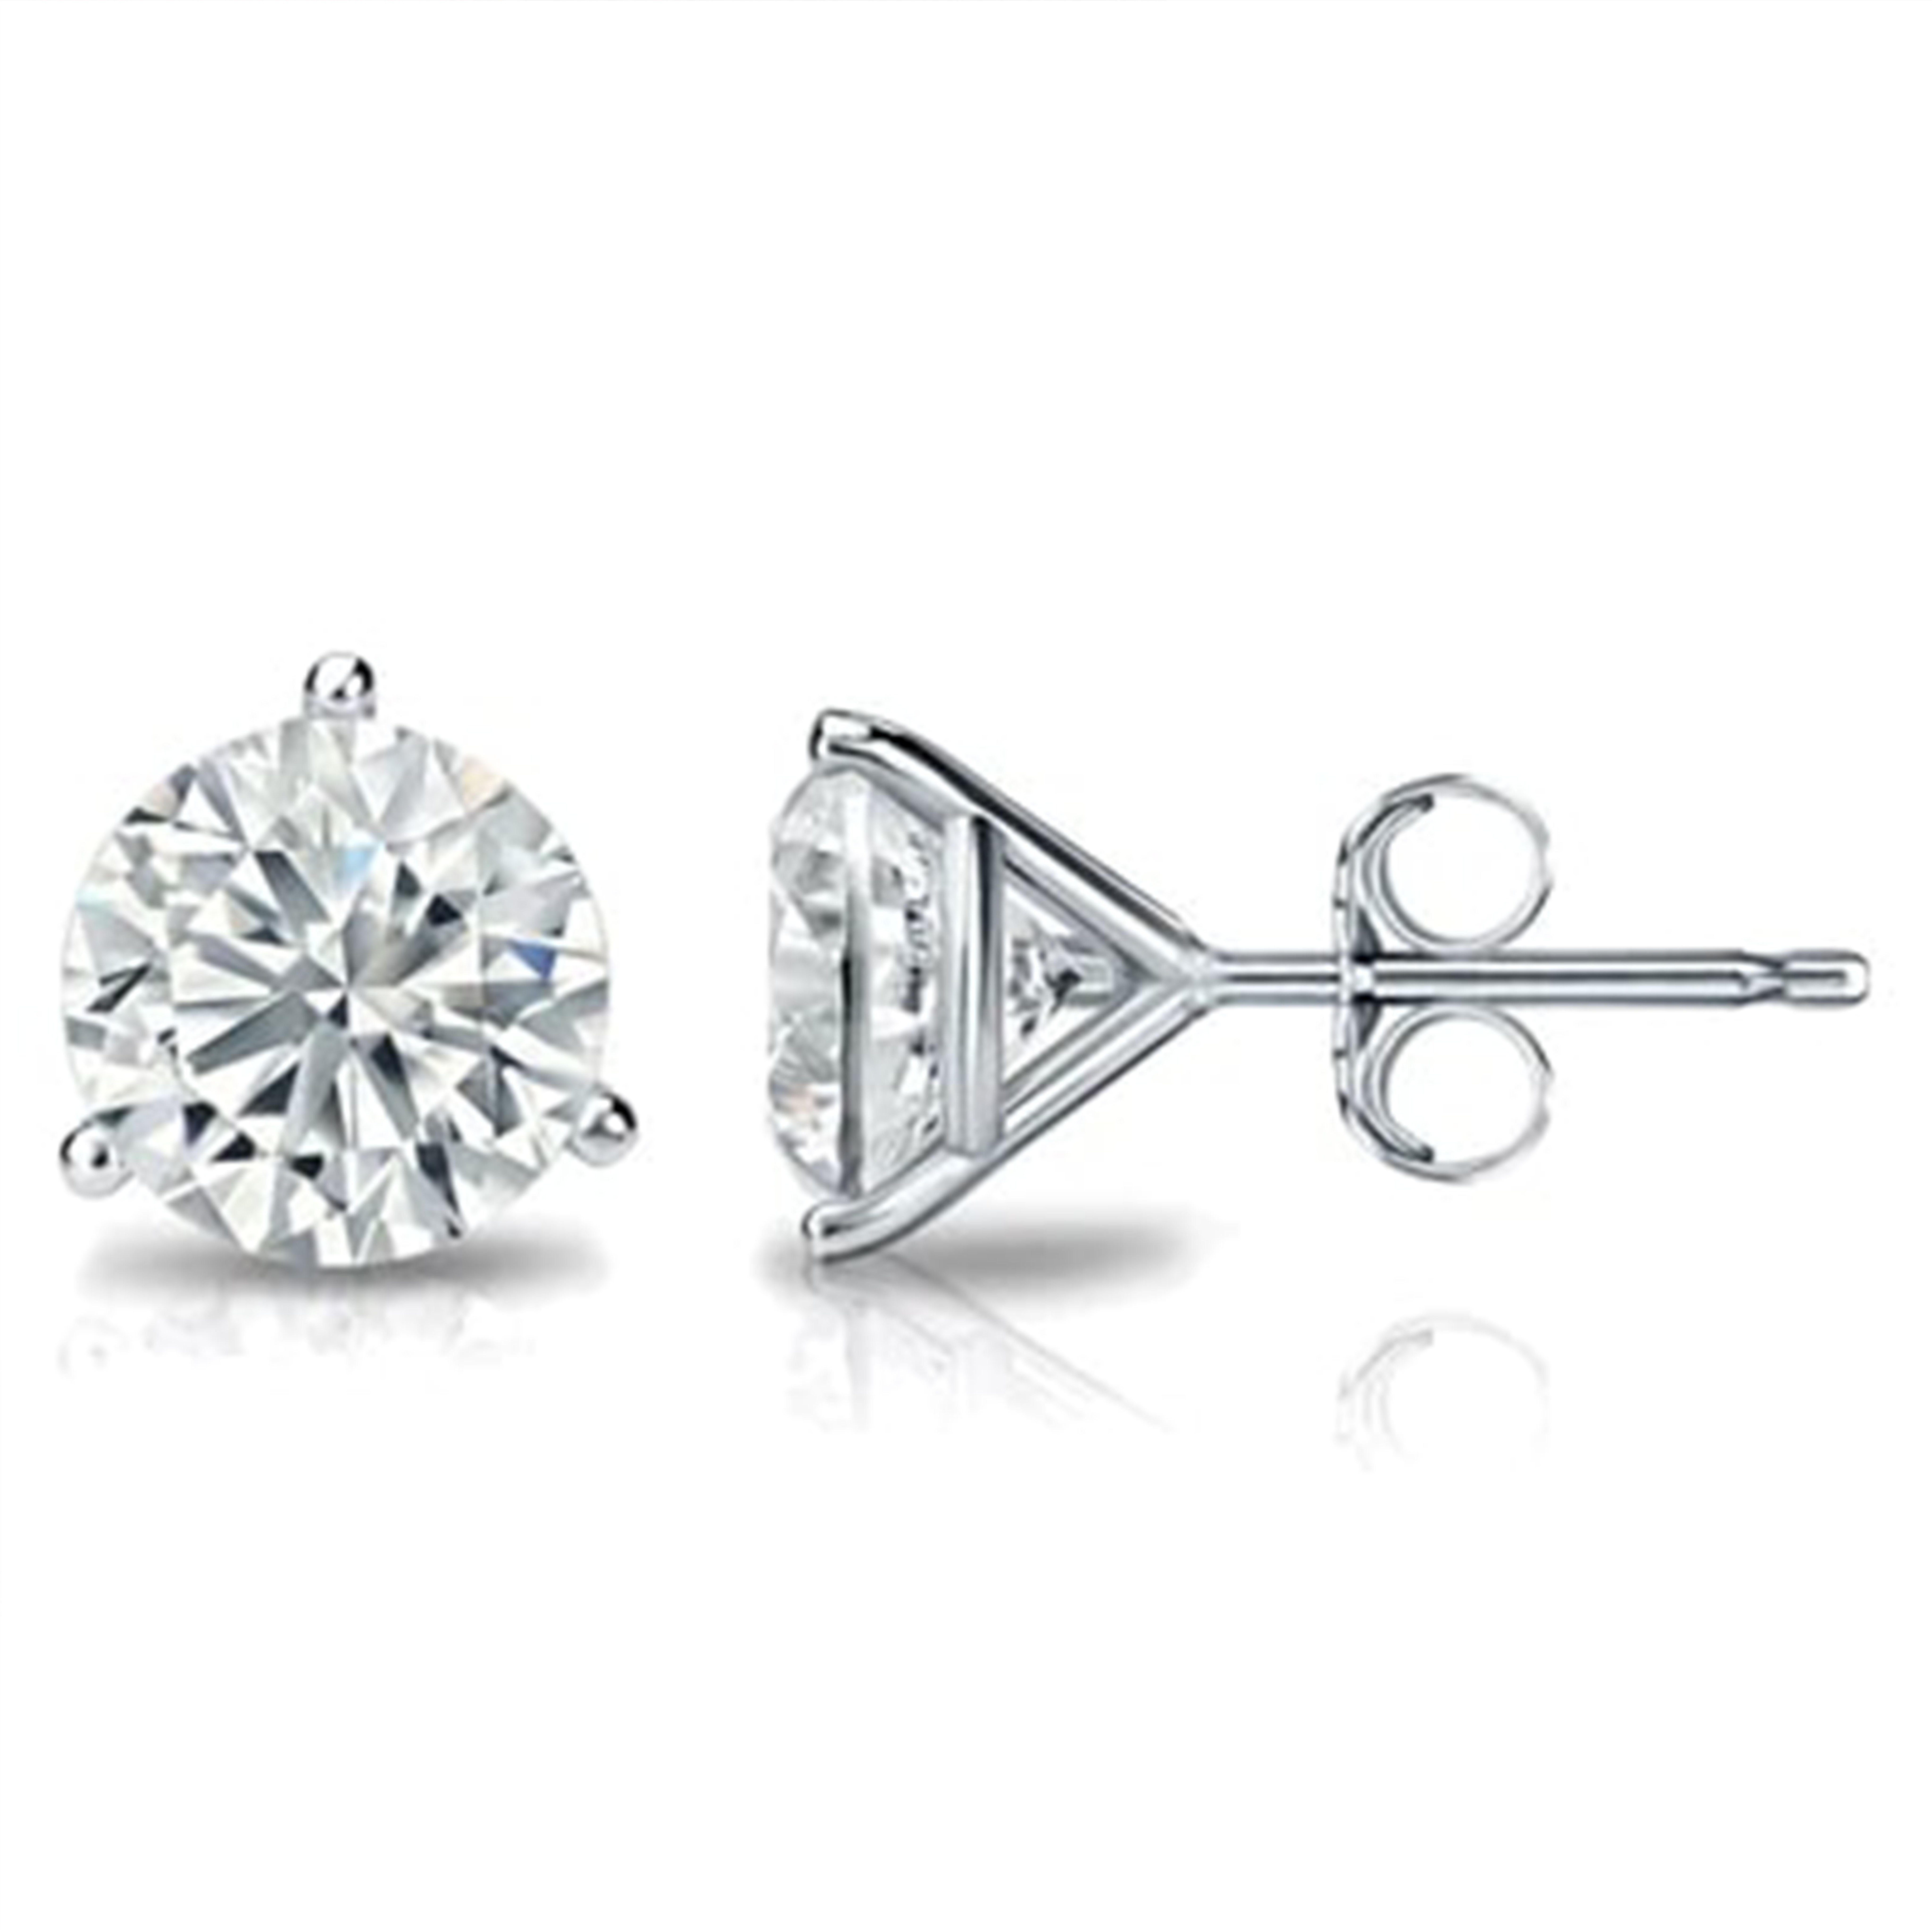 These beautifully matched diamond stud earrings feature round diamonds set in a 14k gold settings.

Setting : 3 Prong Push Back Martini Setting 
Metal : 14k Gold
Diamond Carat Weight : 0.50ttcw
Diamond Cut : Round Natural Conflict Free